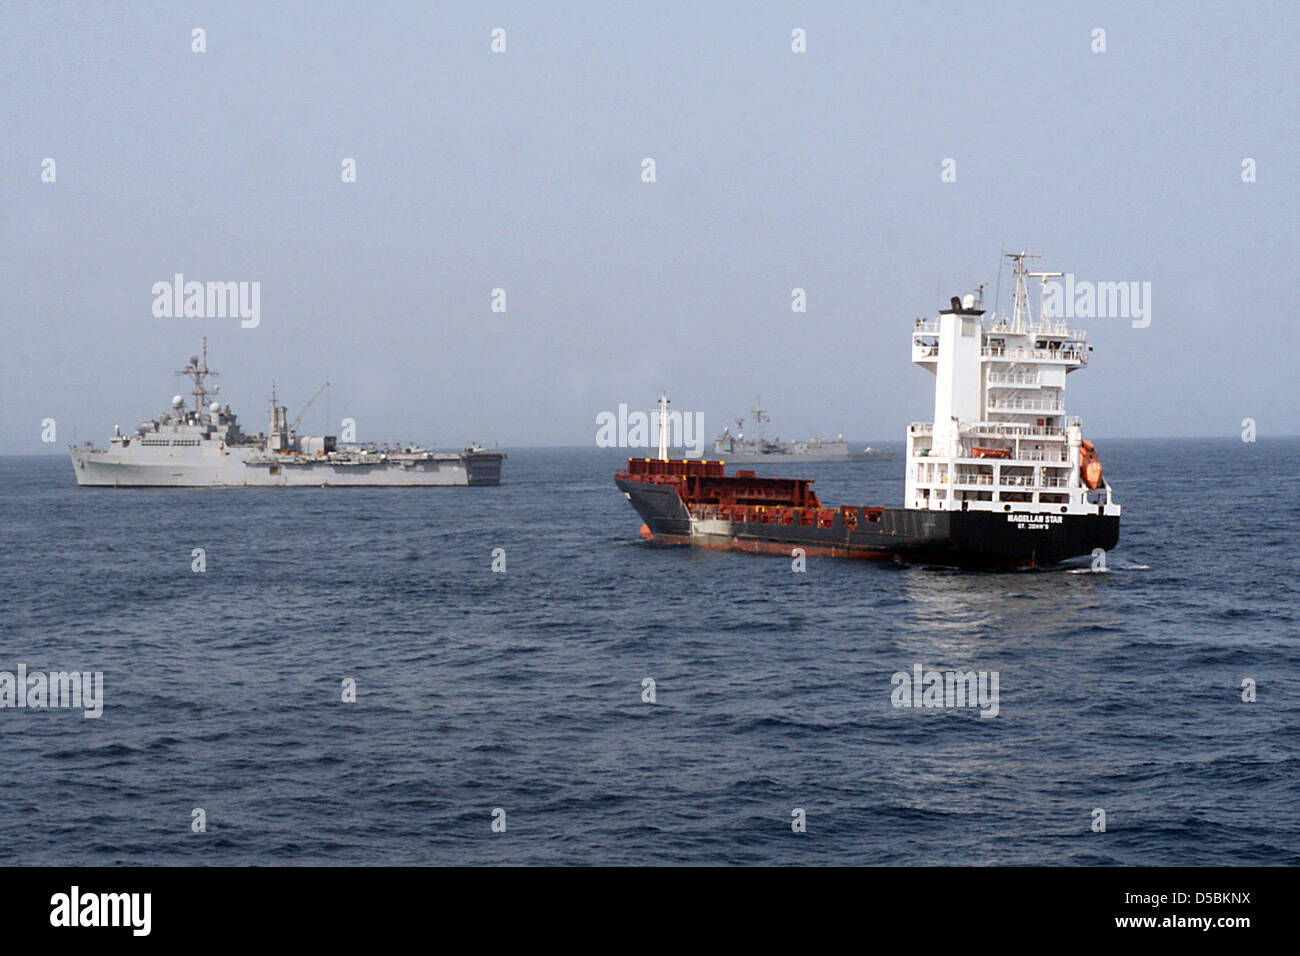 A William Farmerie/US Navy handout picture features the U.S. Navy amphibious transport dock ship 'USS Dubuque (LPD 8)' (C), with the Turkish frigate TCG Gokceada during a board and seizure operation by the U.S. Marine Corps 15th Marine Expeditionary Unit, Maritime Raid Force, embarked aboard Dubuque in the Gulf of Aden, 9 September, 2010. The German motor vessel M/V Magellan Star w Stock Photo